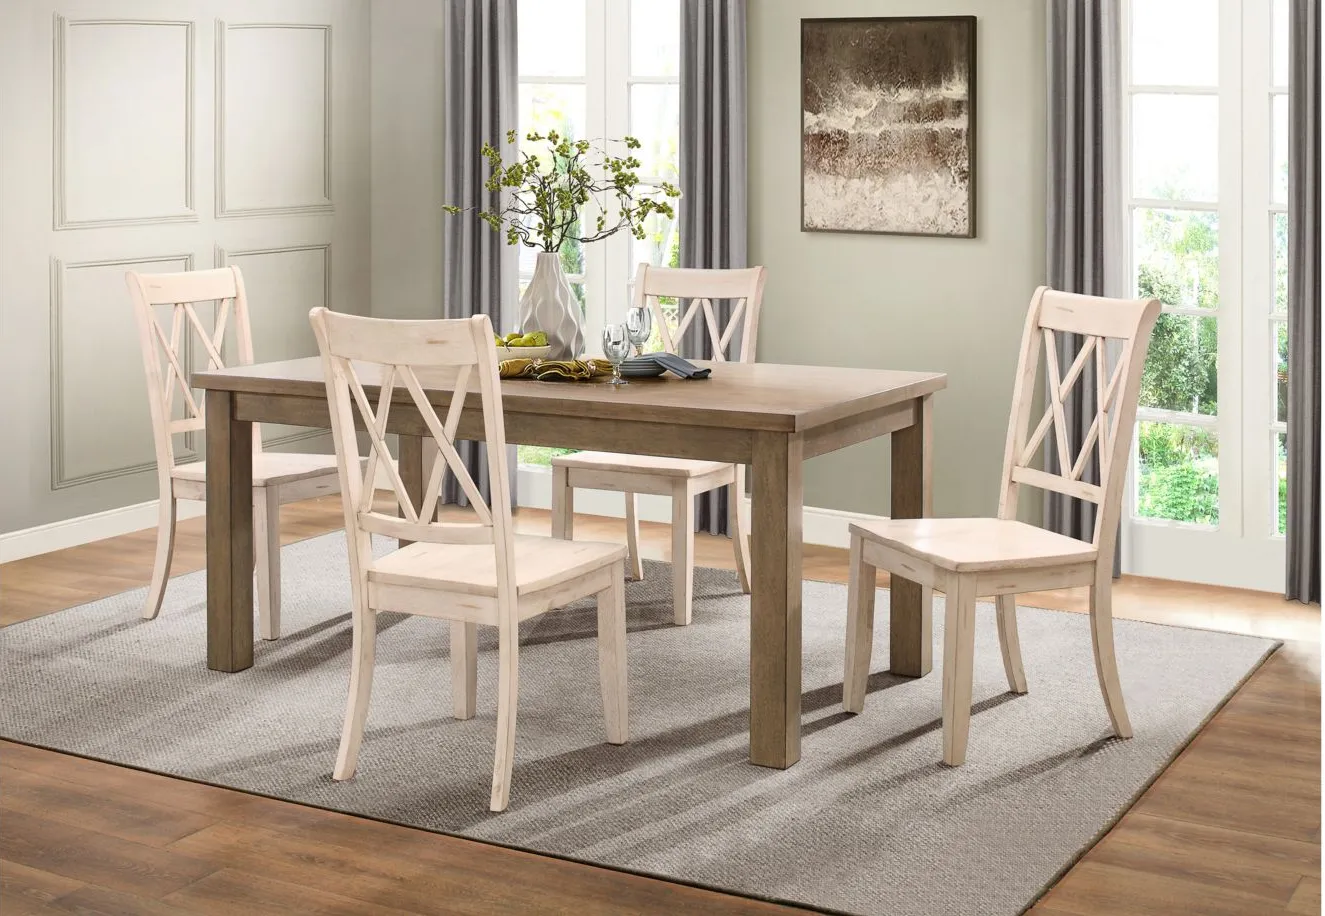 Salena 5-pc. Dining Set in Natural & White by Homelegance